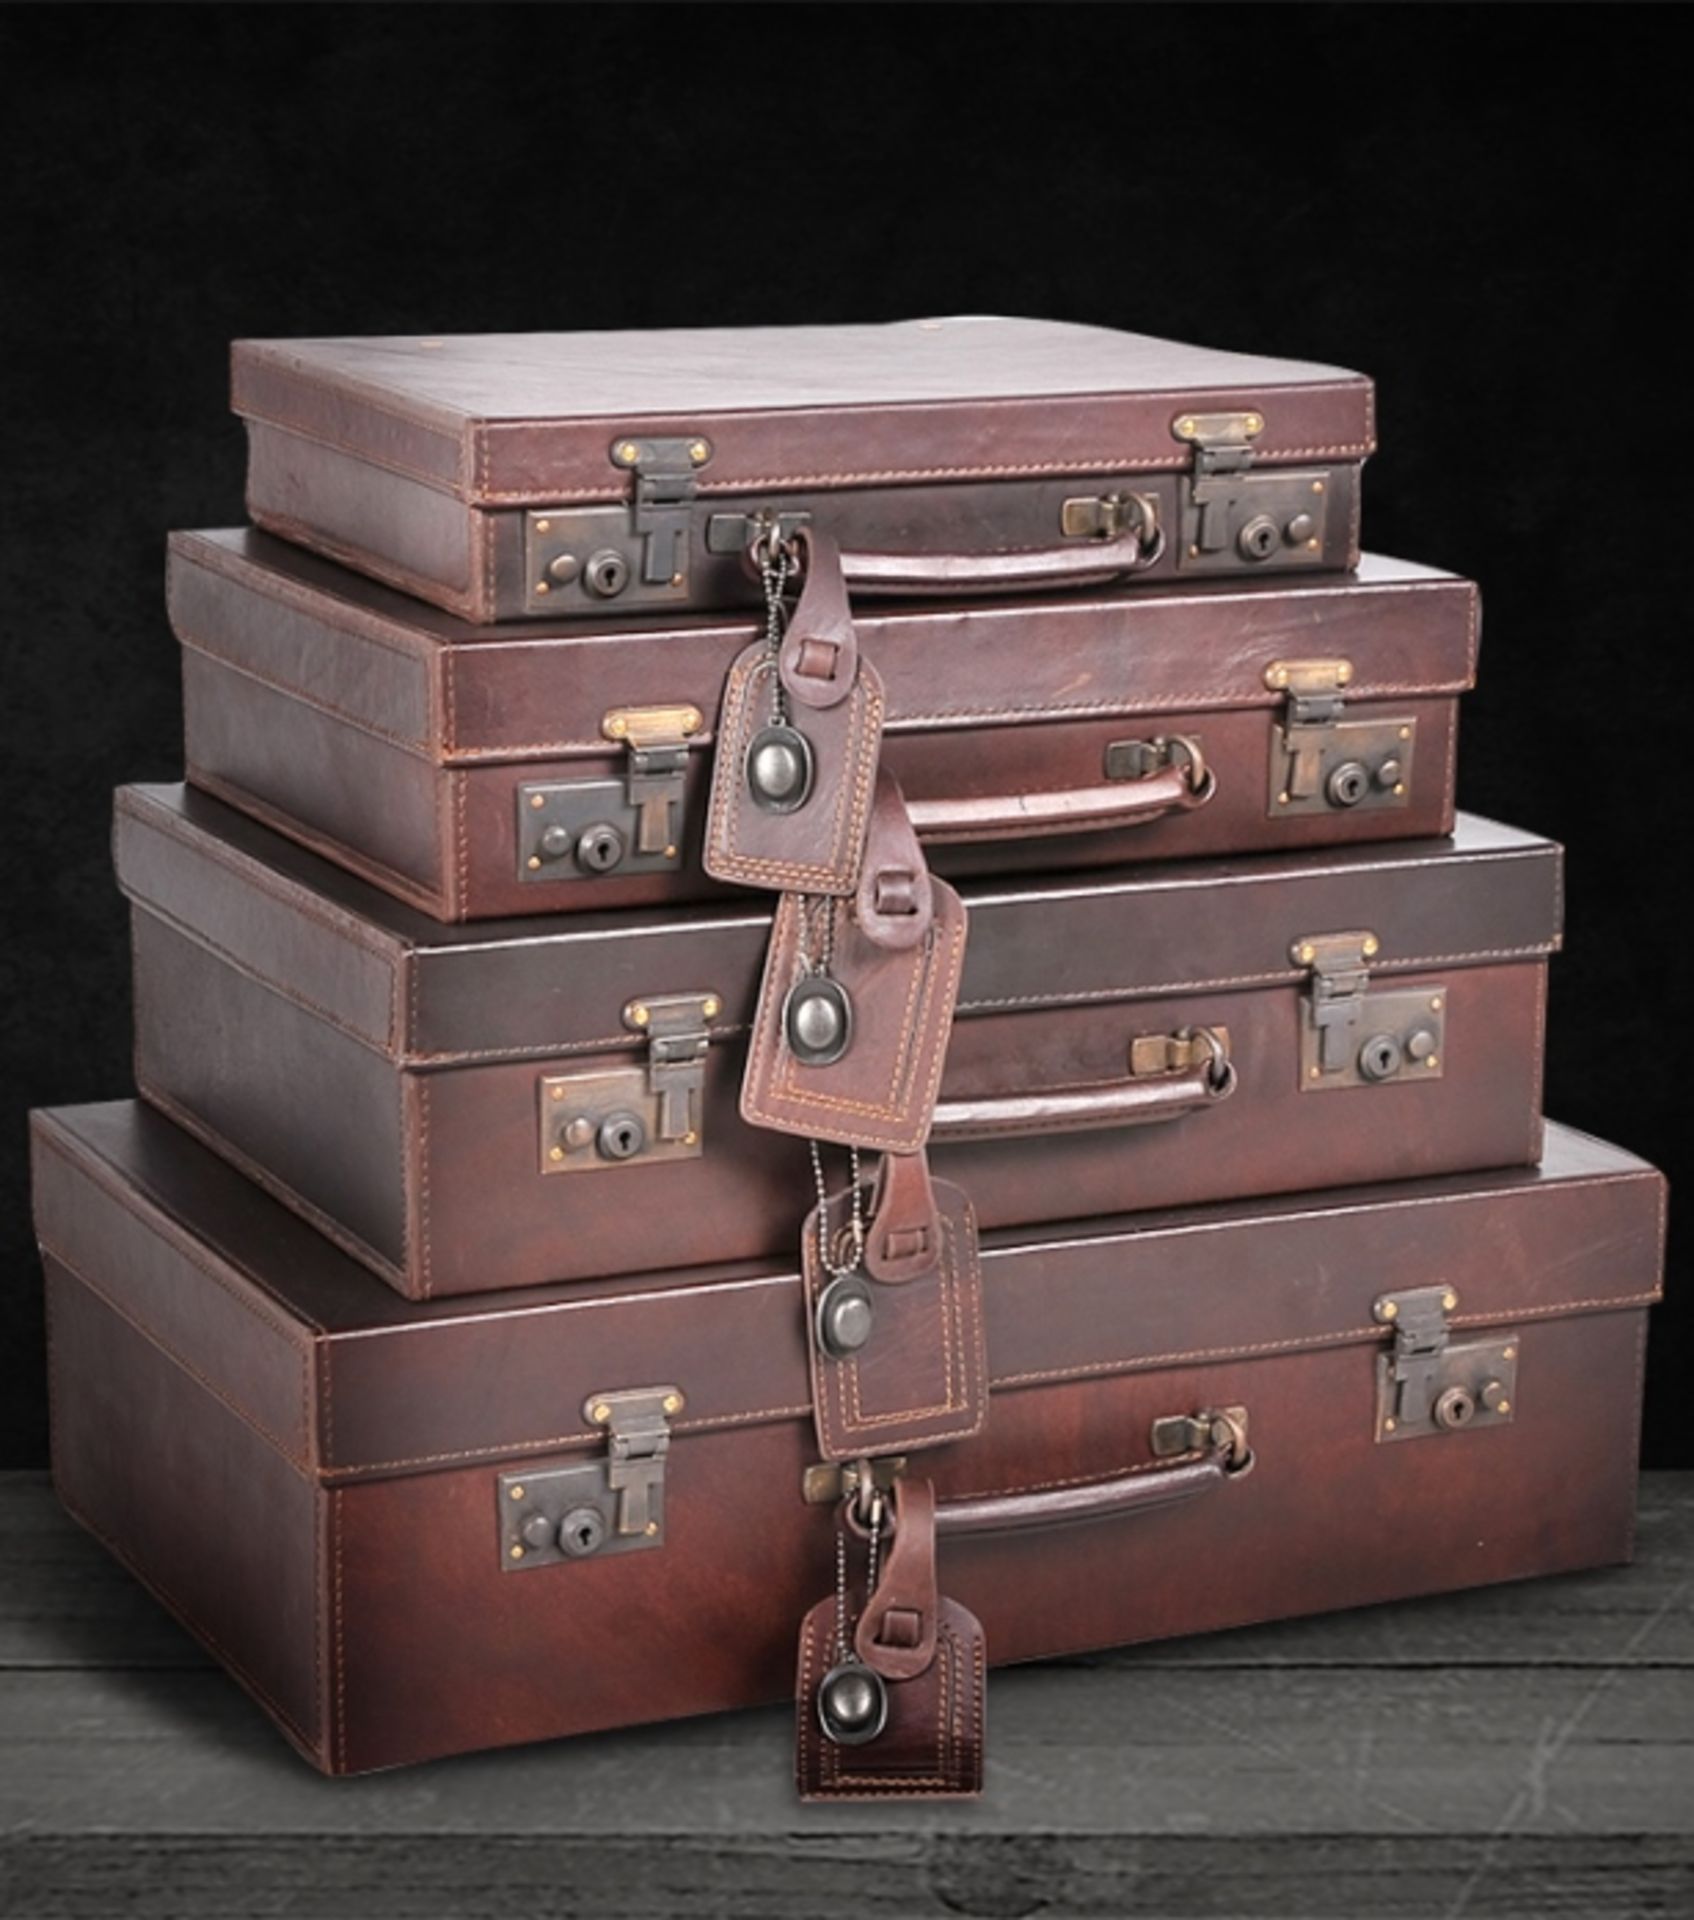 Drake Leather Case Our Drake cases emanate the nostalgic look of old classic luggage, redesigned